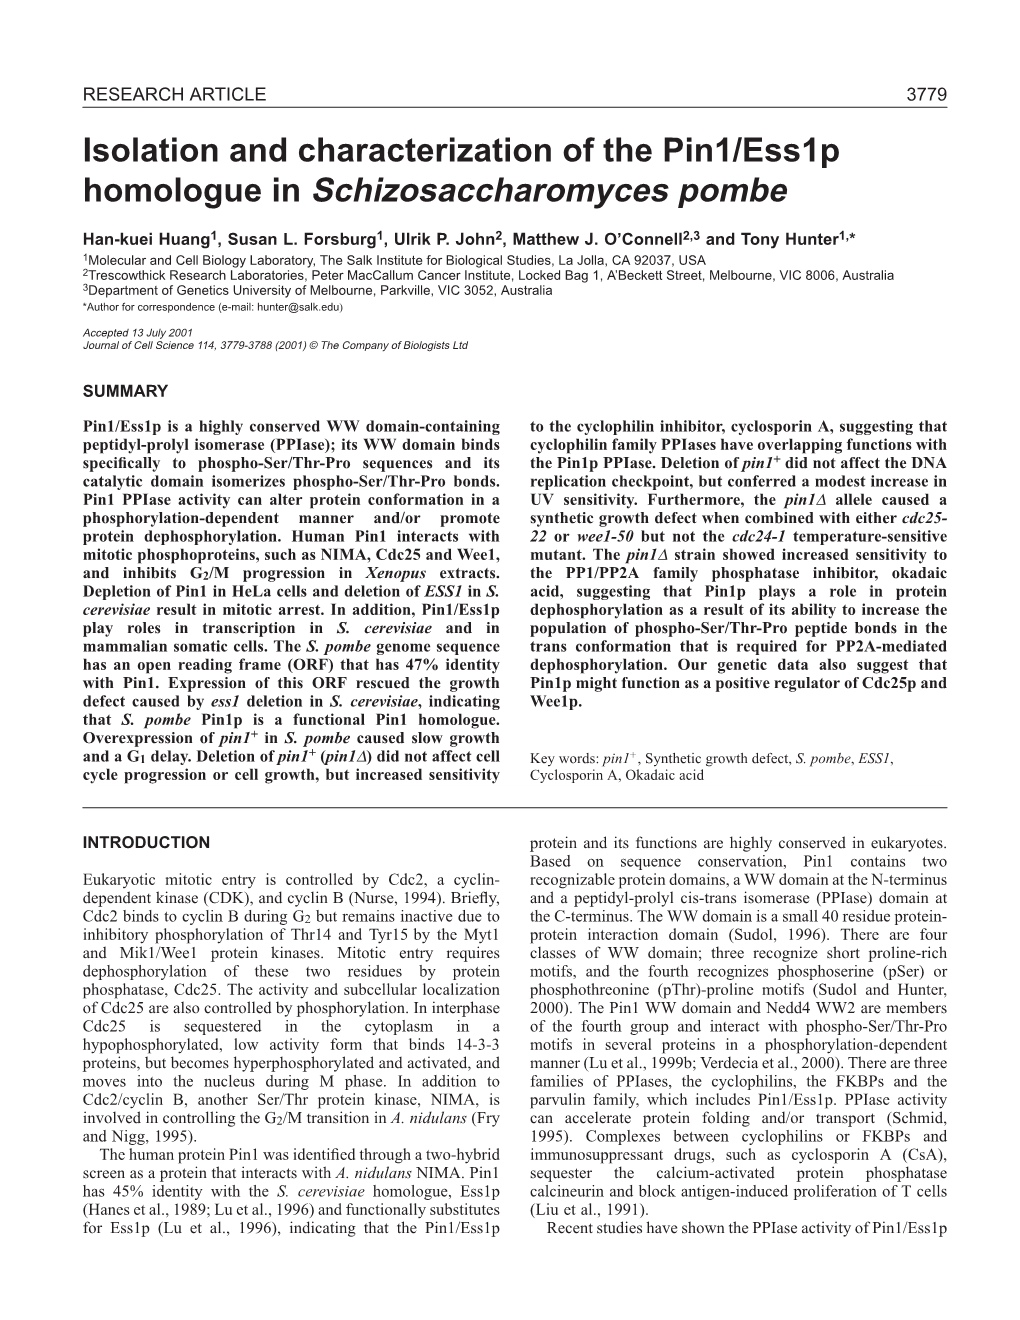 Isolation and Characterization of the Pin1/Ess1p Homologue in Schizosaccharomyces Pombe